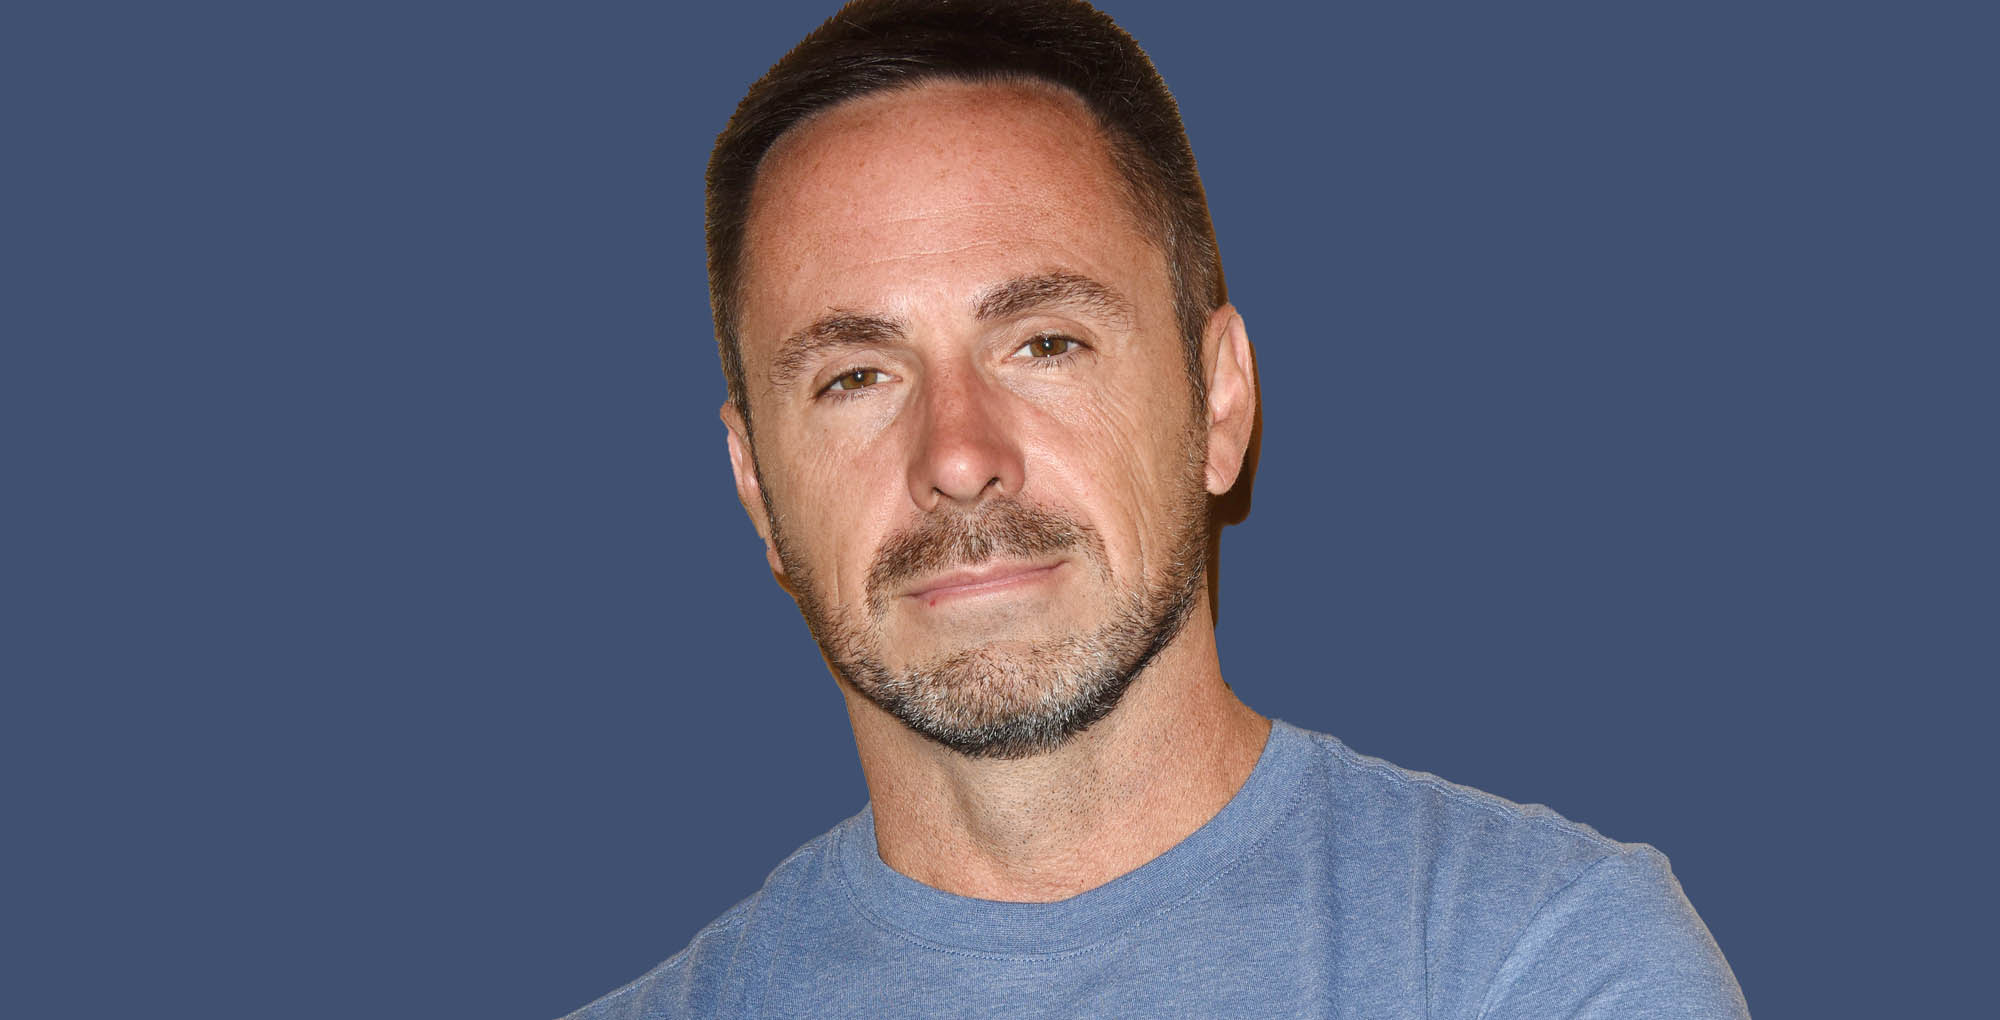 general hospital and bold and the beautiful alum william devry against a blue background.